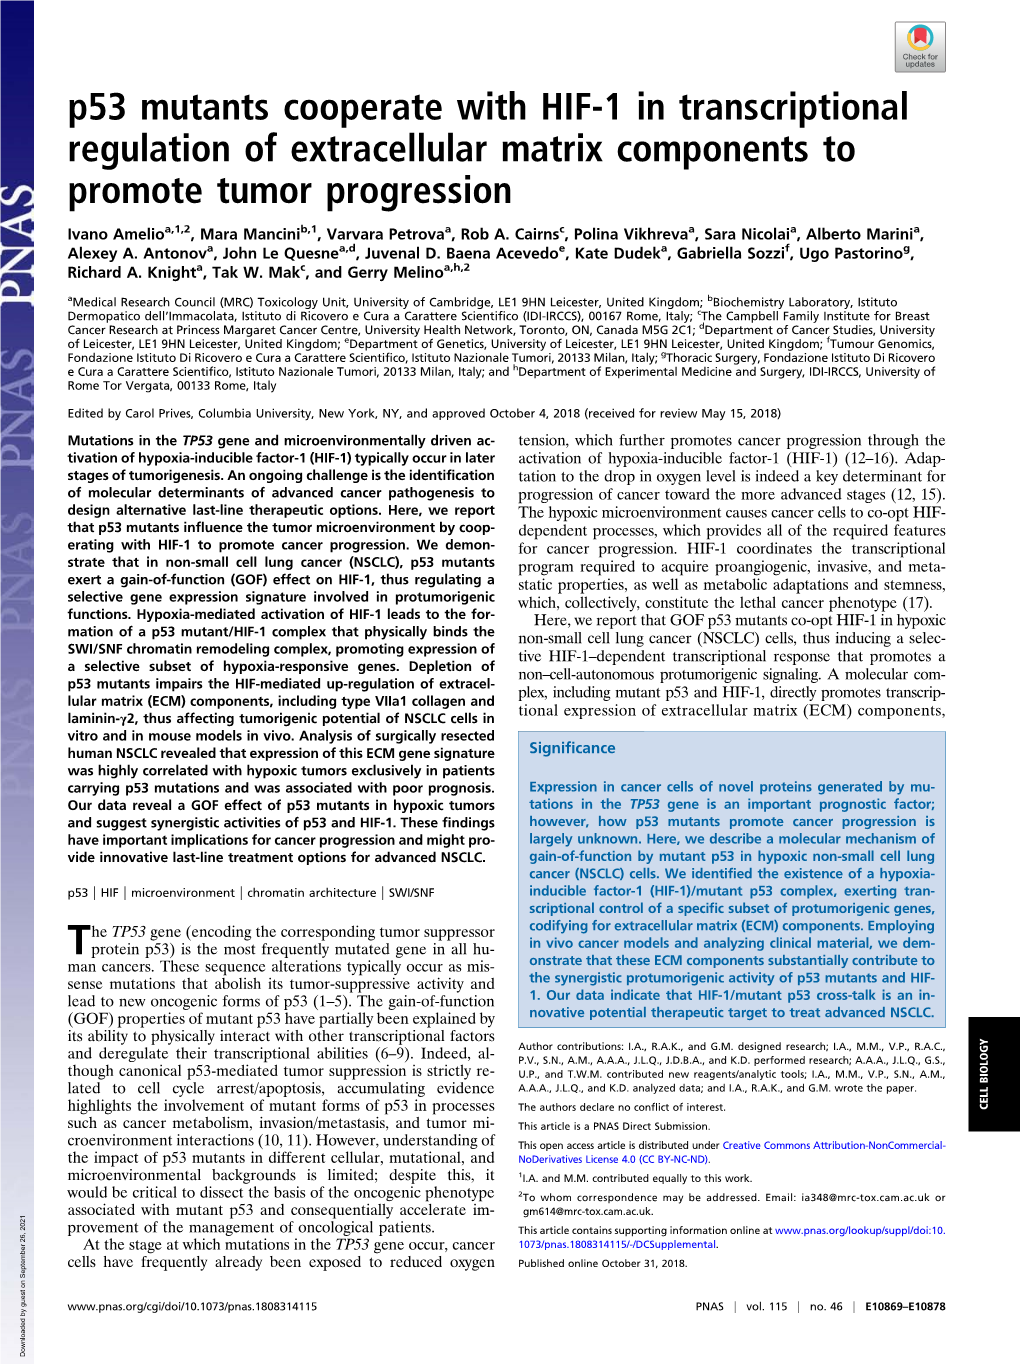 P53 Mutants Cooperate with HIF-1 in Transcriptional Regulation of Extracellular Matrix Components to Promote Tumor Progression